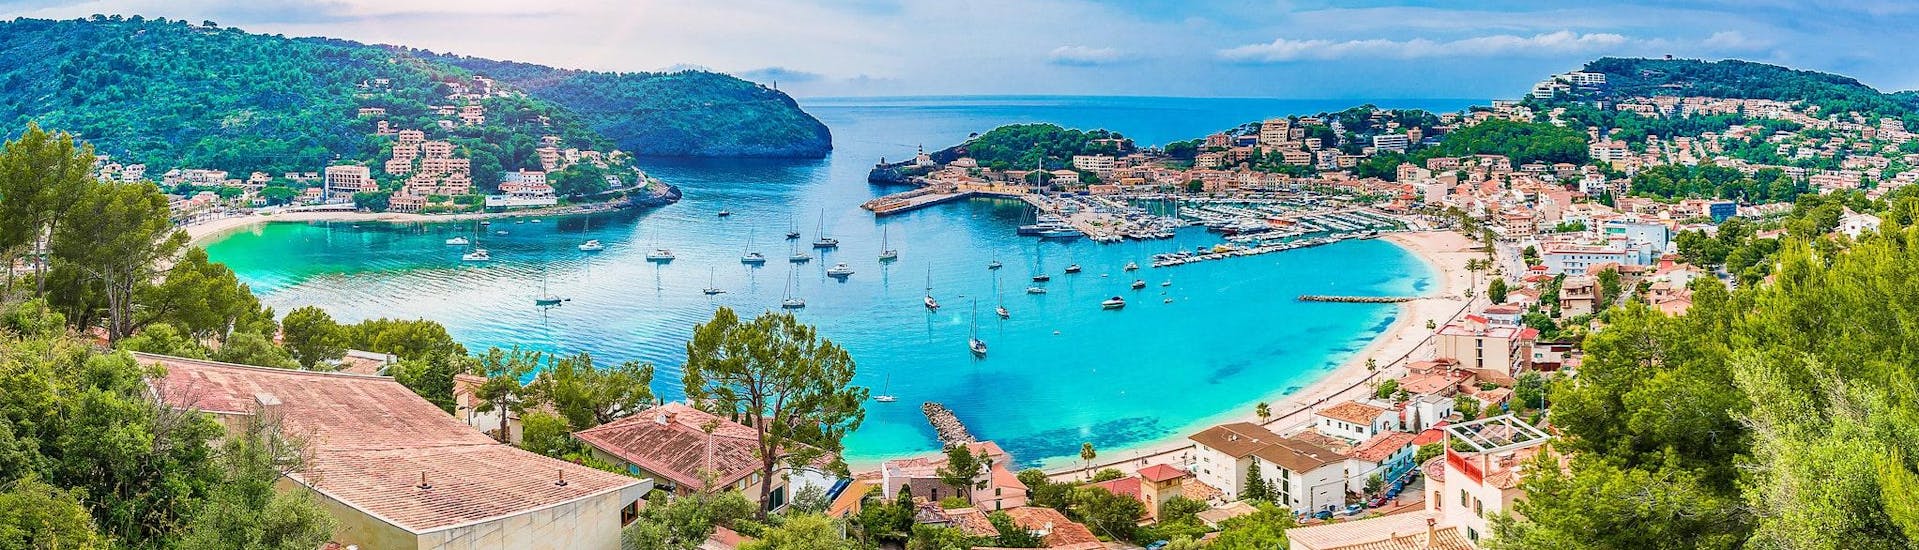 A beautiful view over Port de Sollér, from where you can start wonderful boat trips along the west coast of Mallorca.